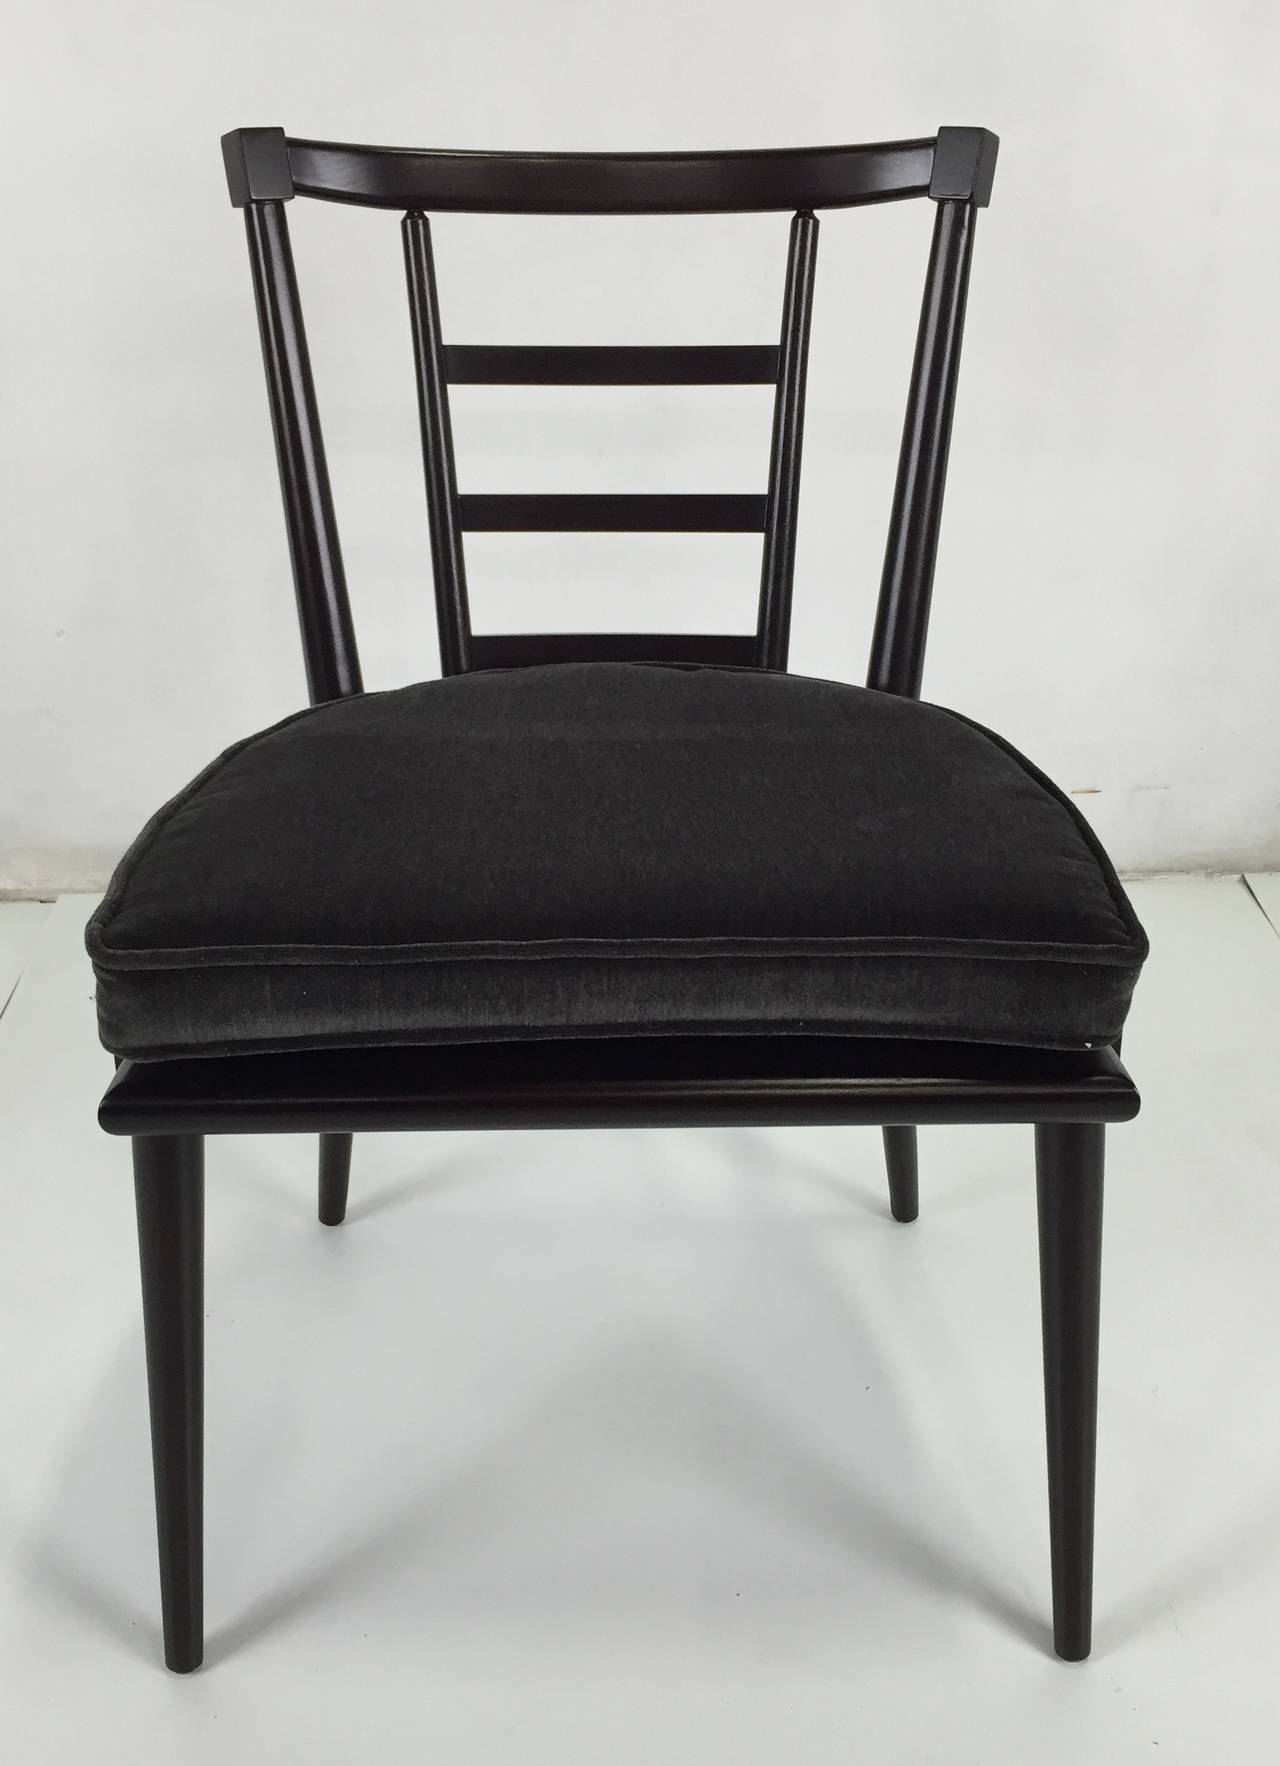 Set of six dining chairs by Bert England for Johnson furniture. The set consists of two Armchairs and four side chairs. The set has been painstakingly refinished in dark brown lacquer and are presented in perfect condition. Cushions have been